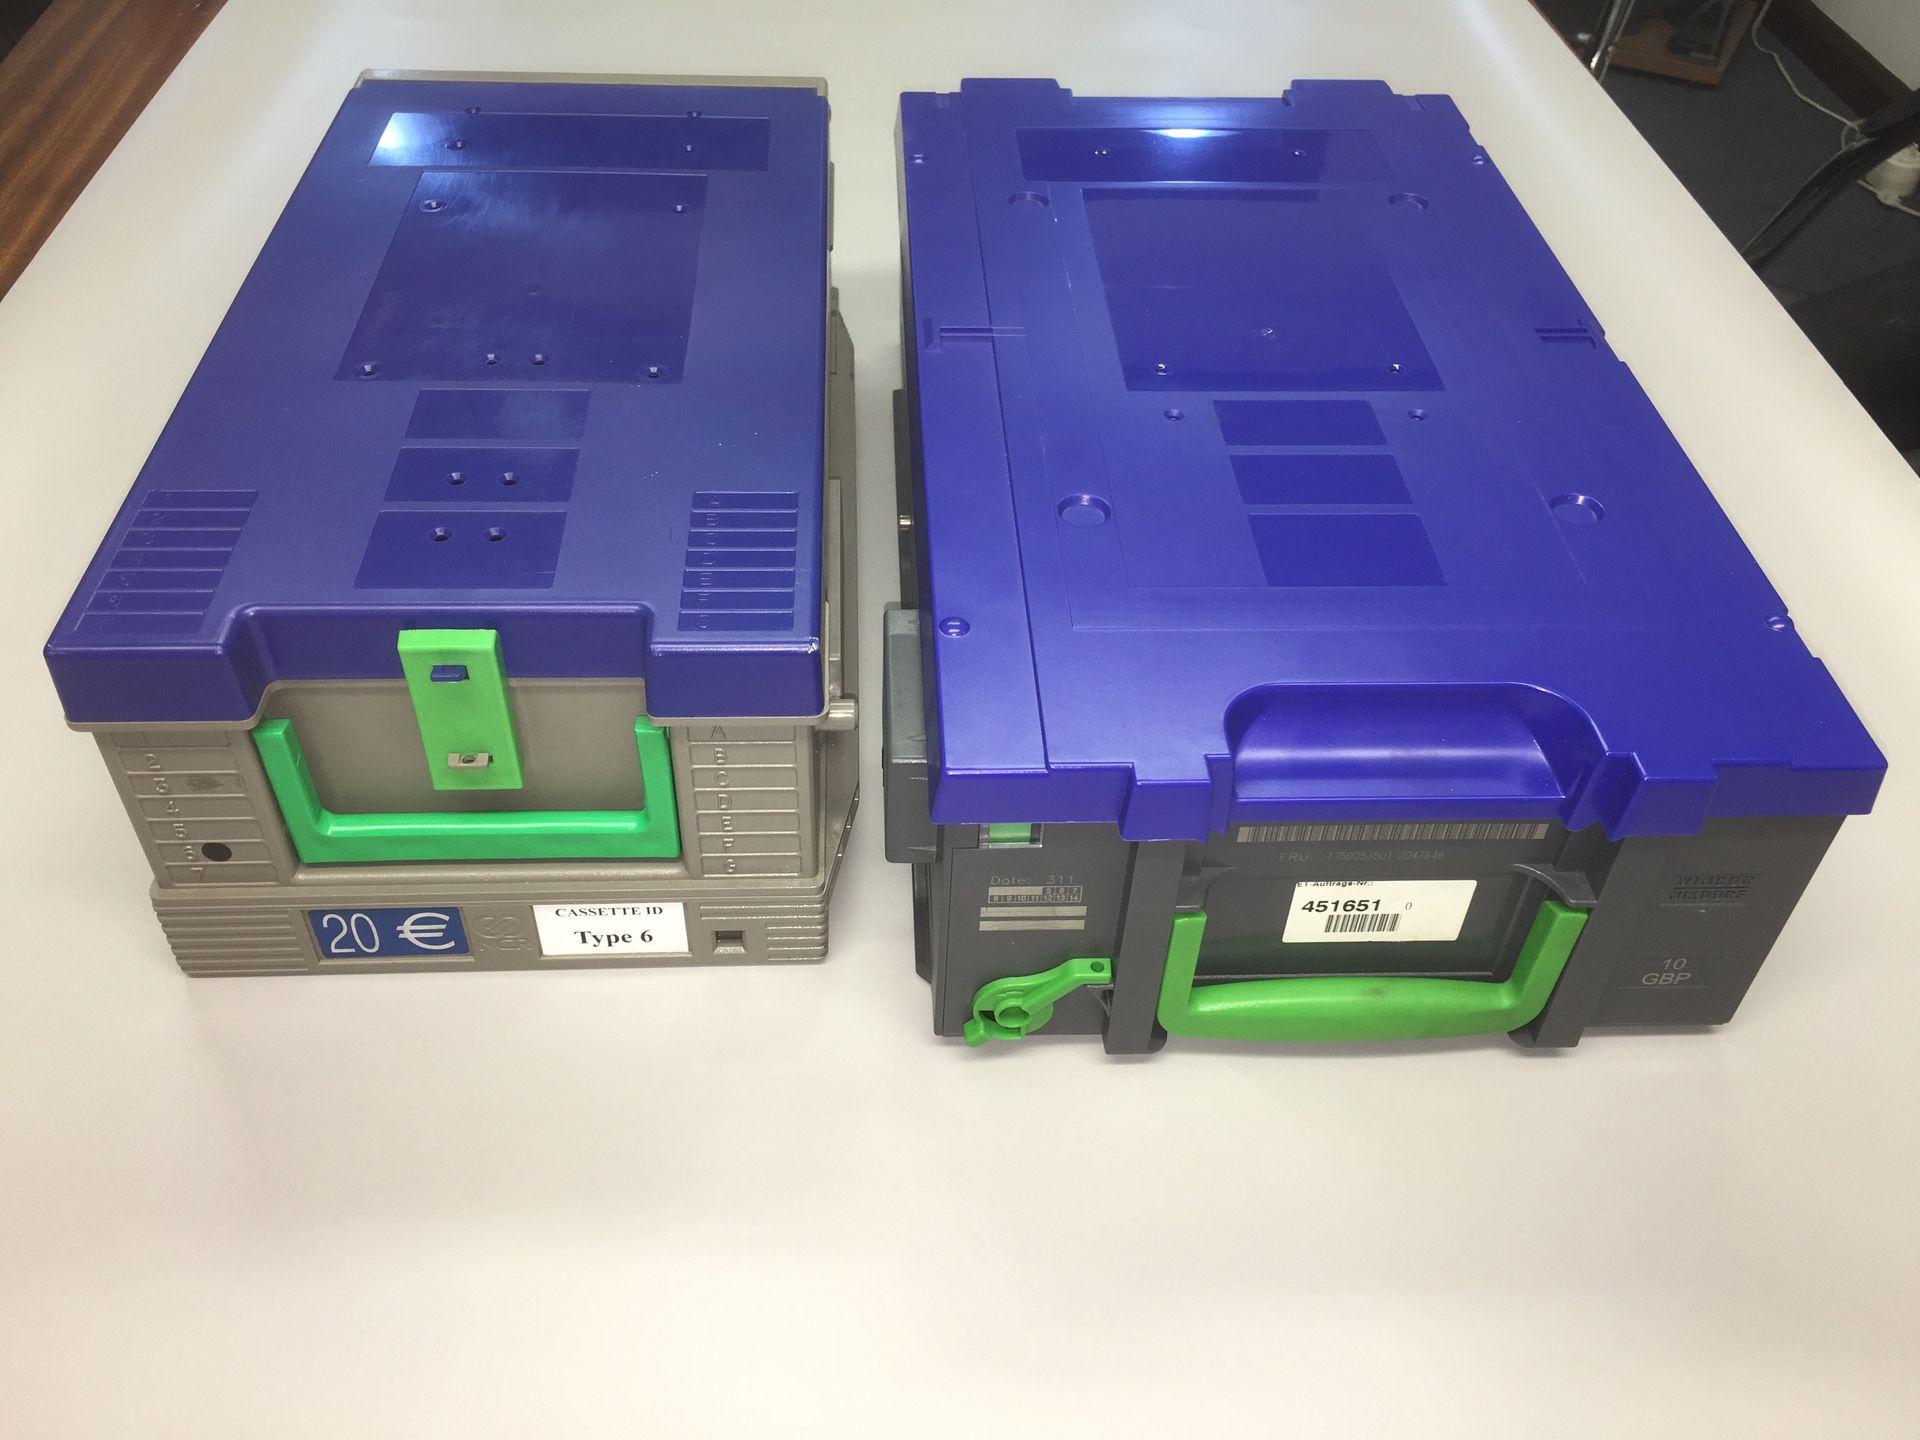 Two blue boxes with green handles on a white surface